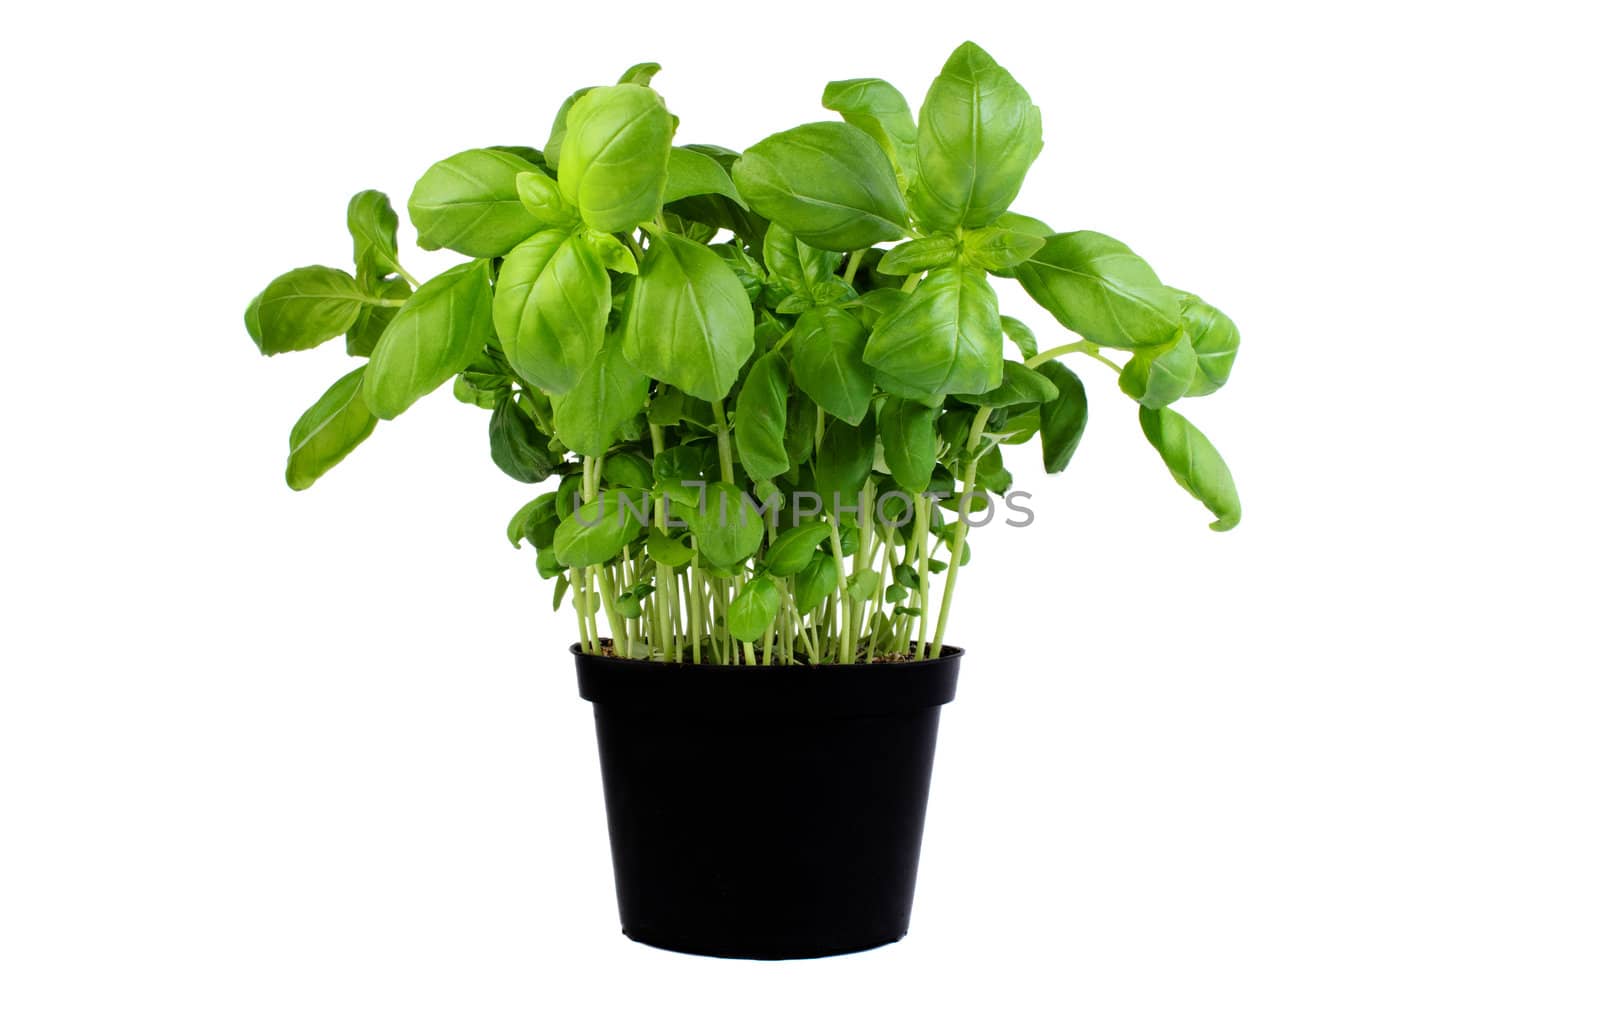 Basil growing in a pot isolated